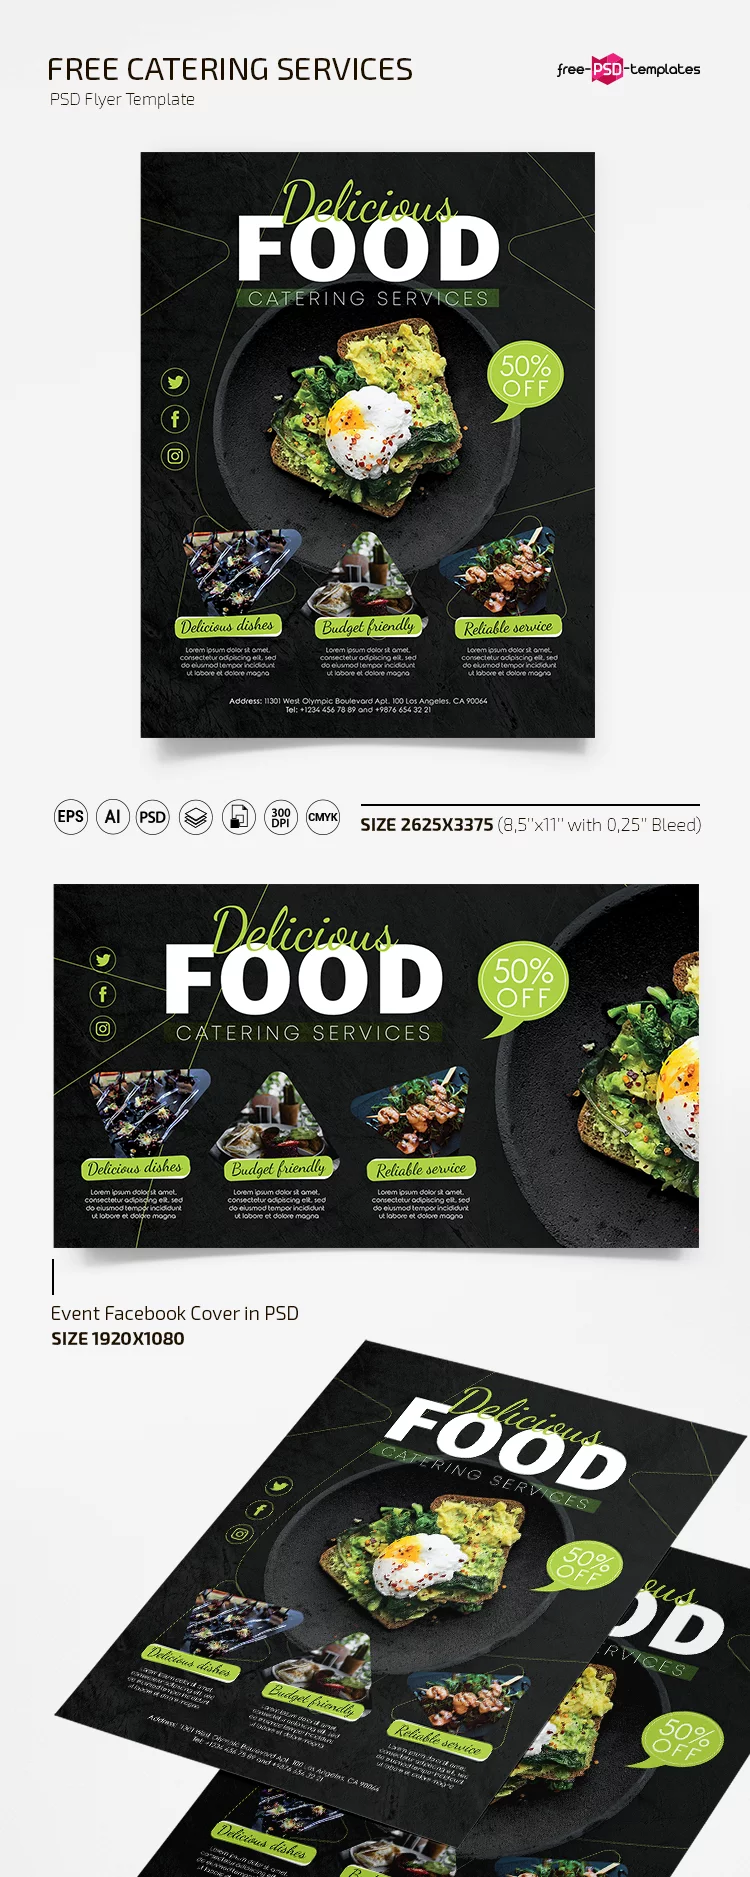 Free Catering Services Flyer Template in PSD + AI